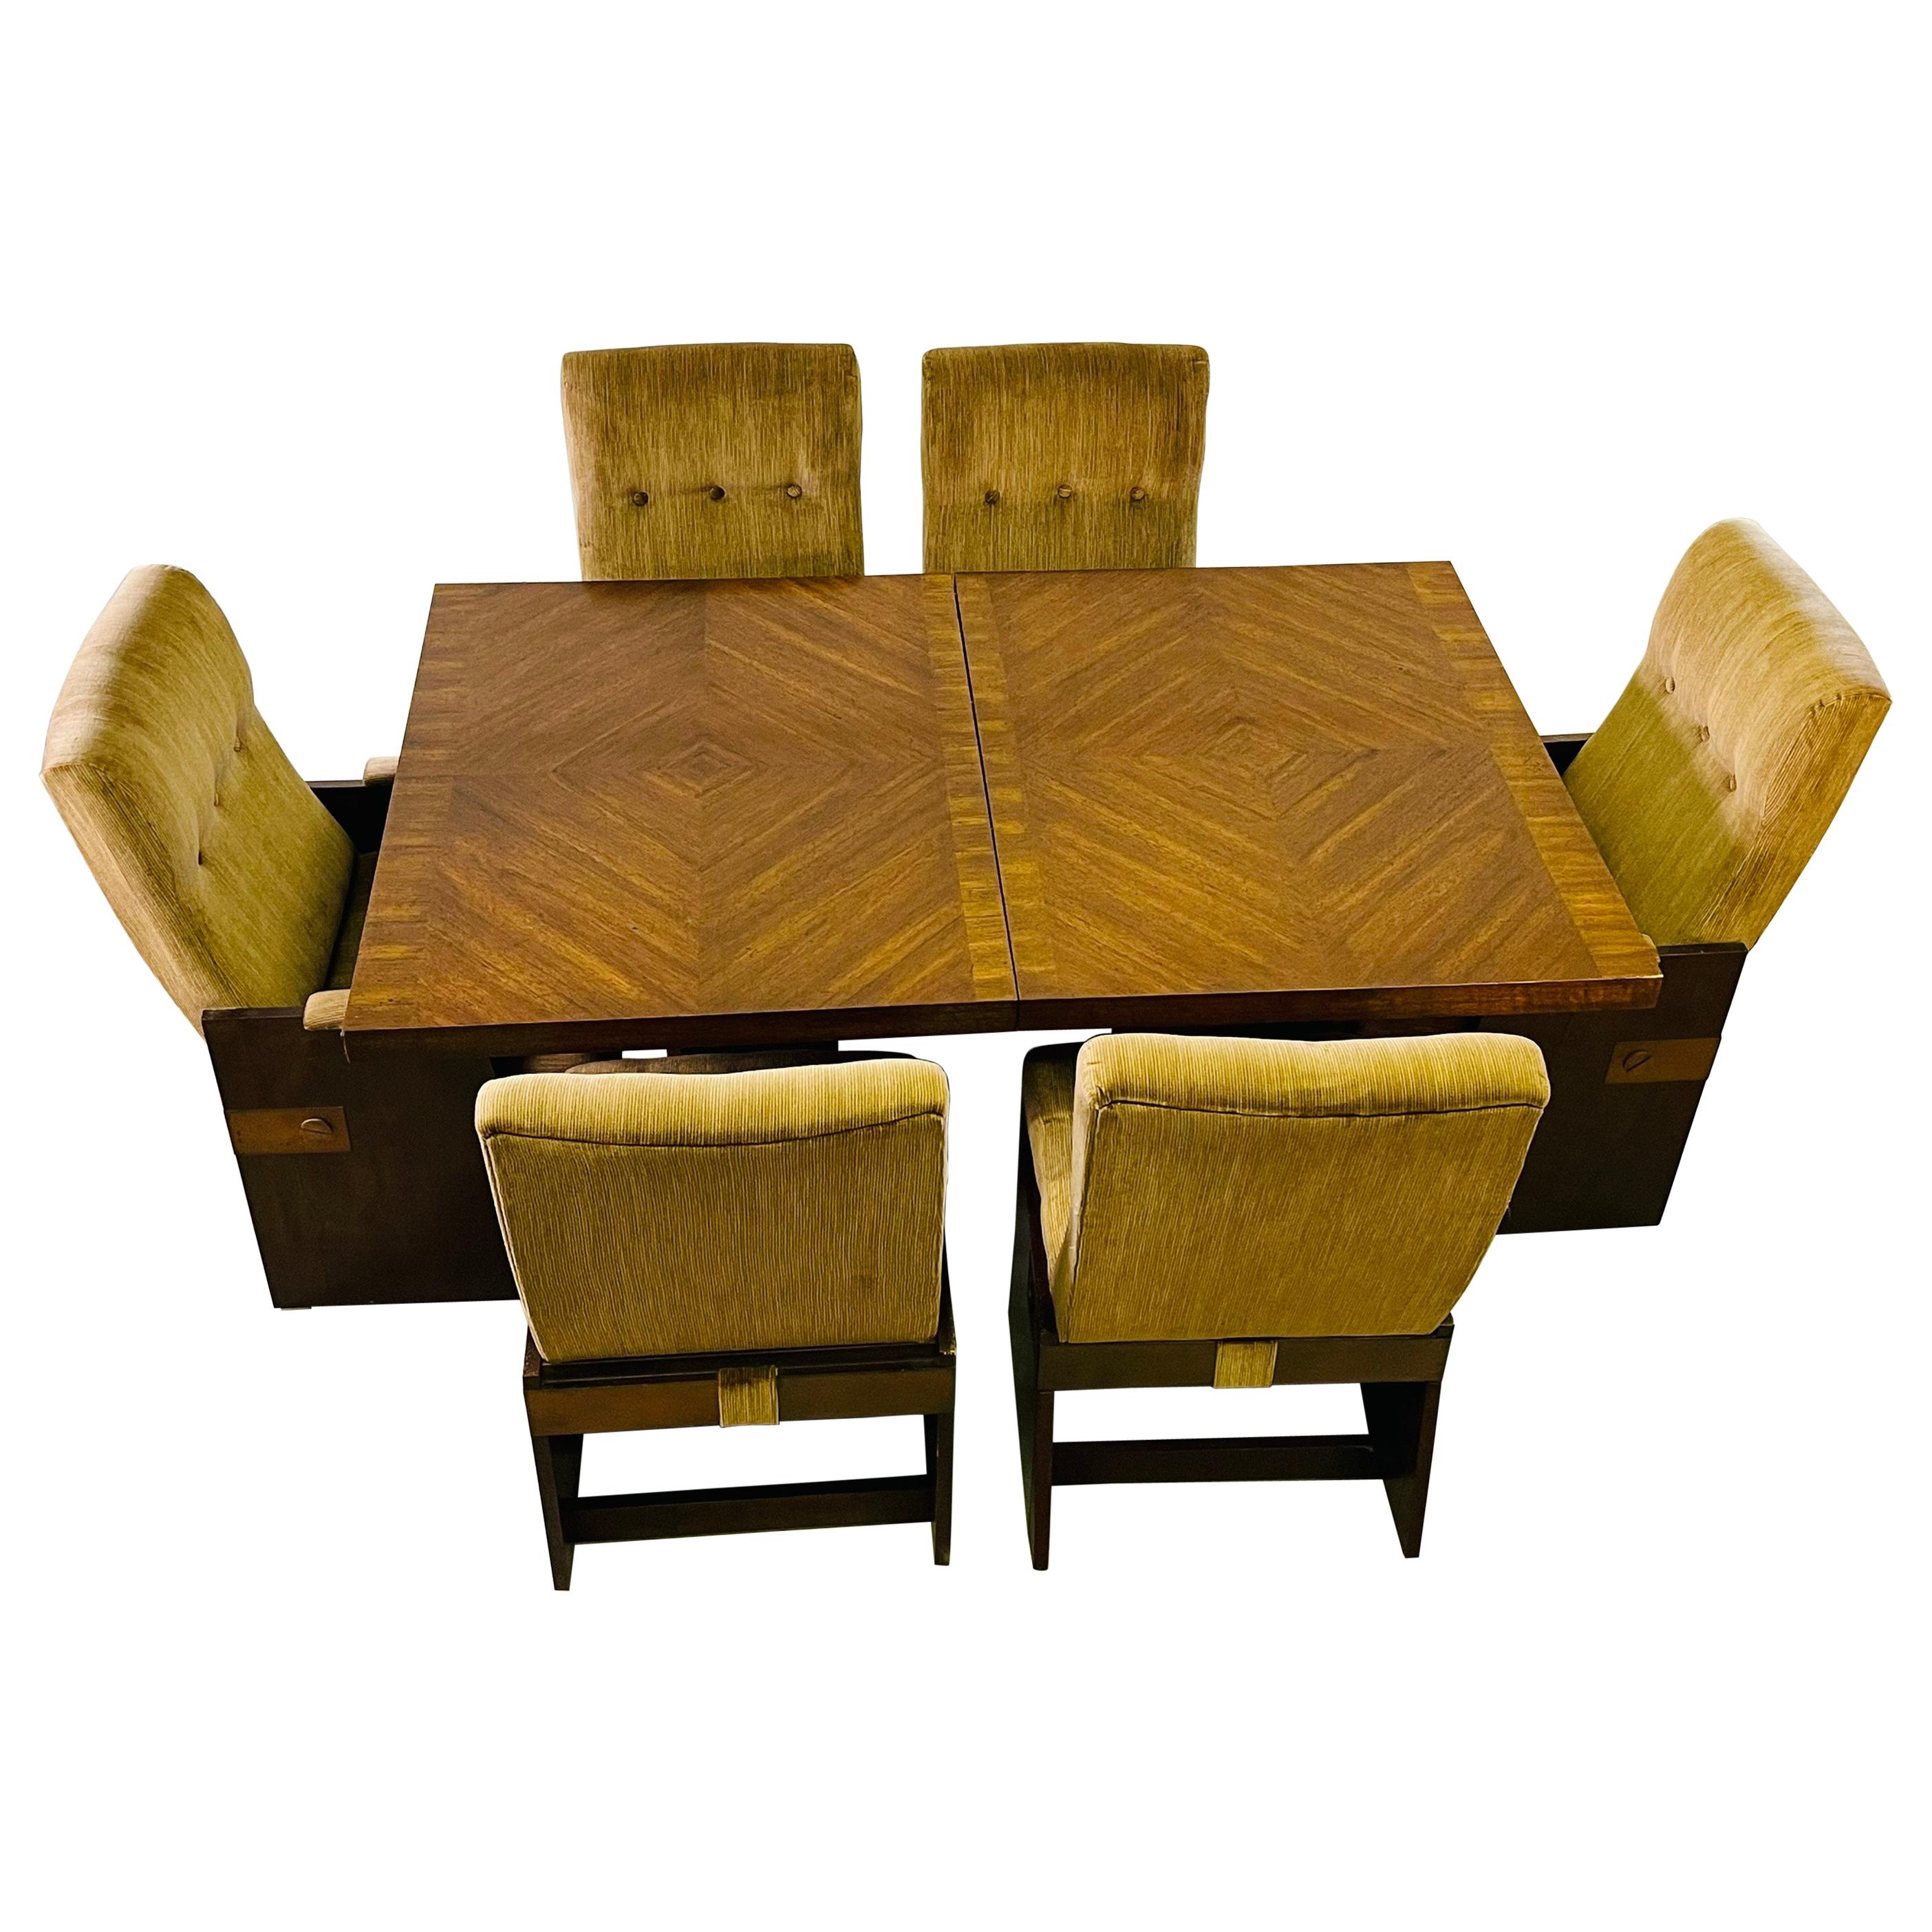 1970s Lane Furniture Brutalist Style Dining Table & 6 Chairs